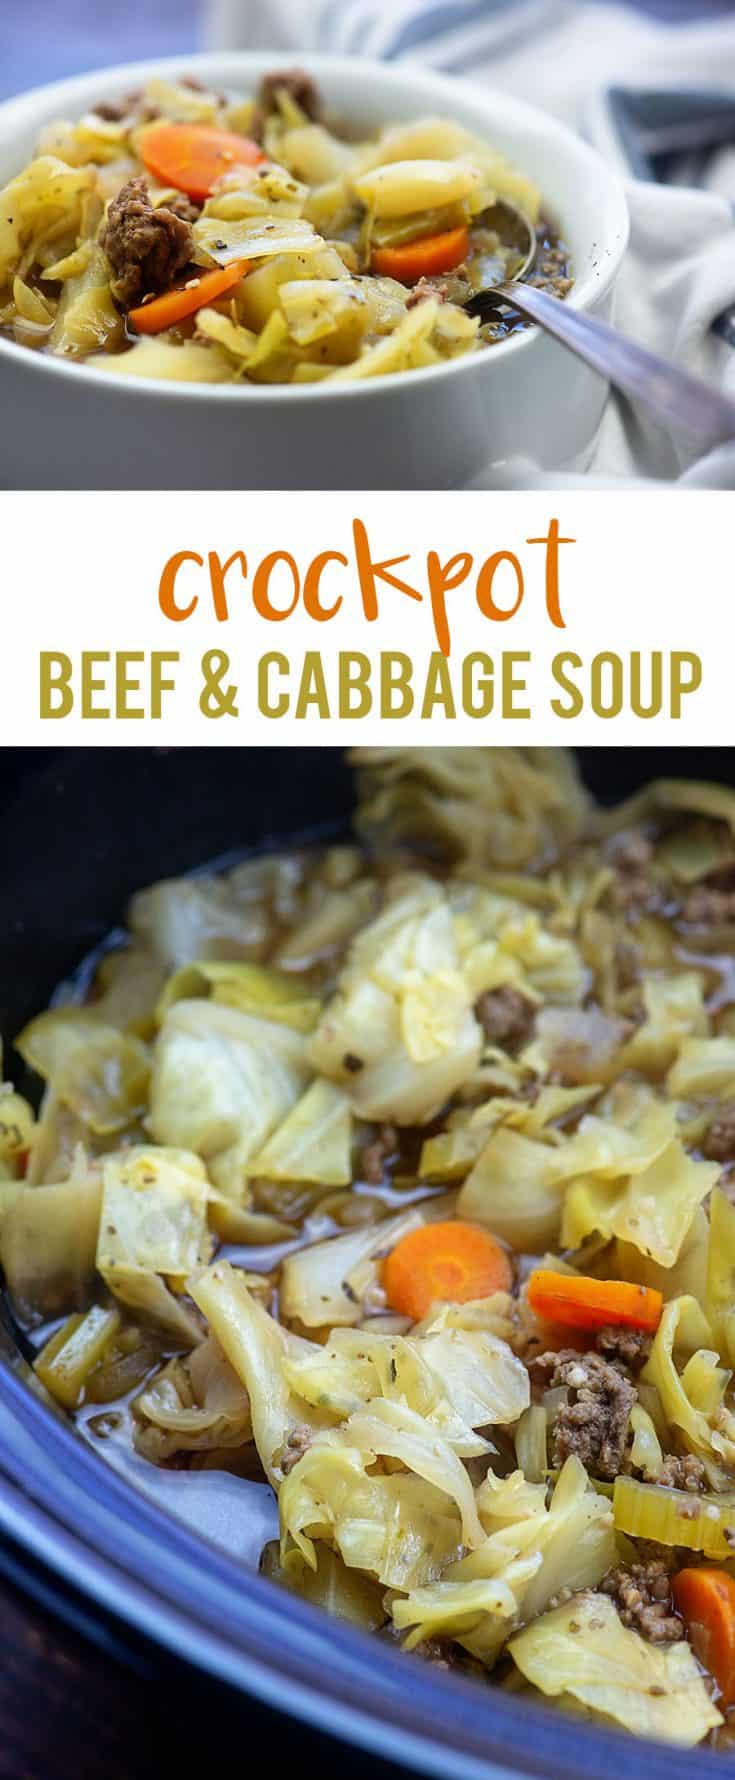 Crockpot Cabbage Soup with Beef | That Low Carb Life